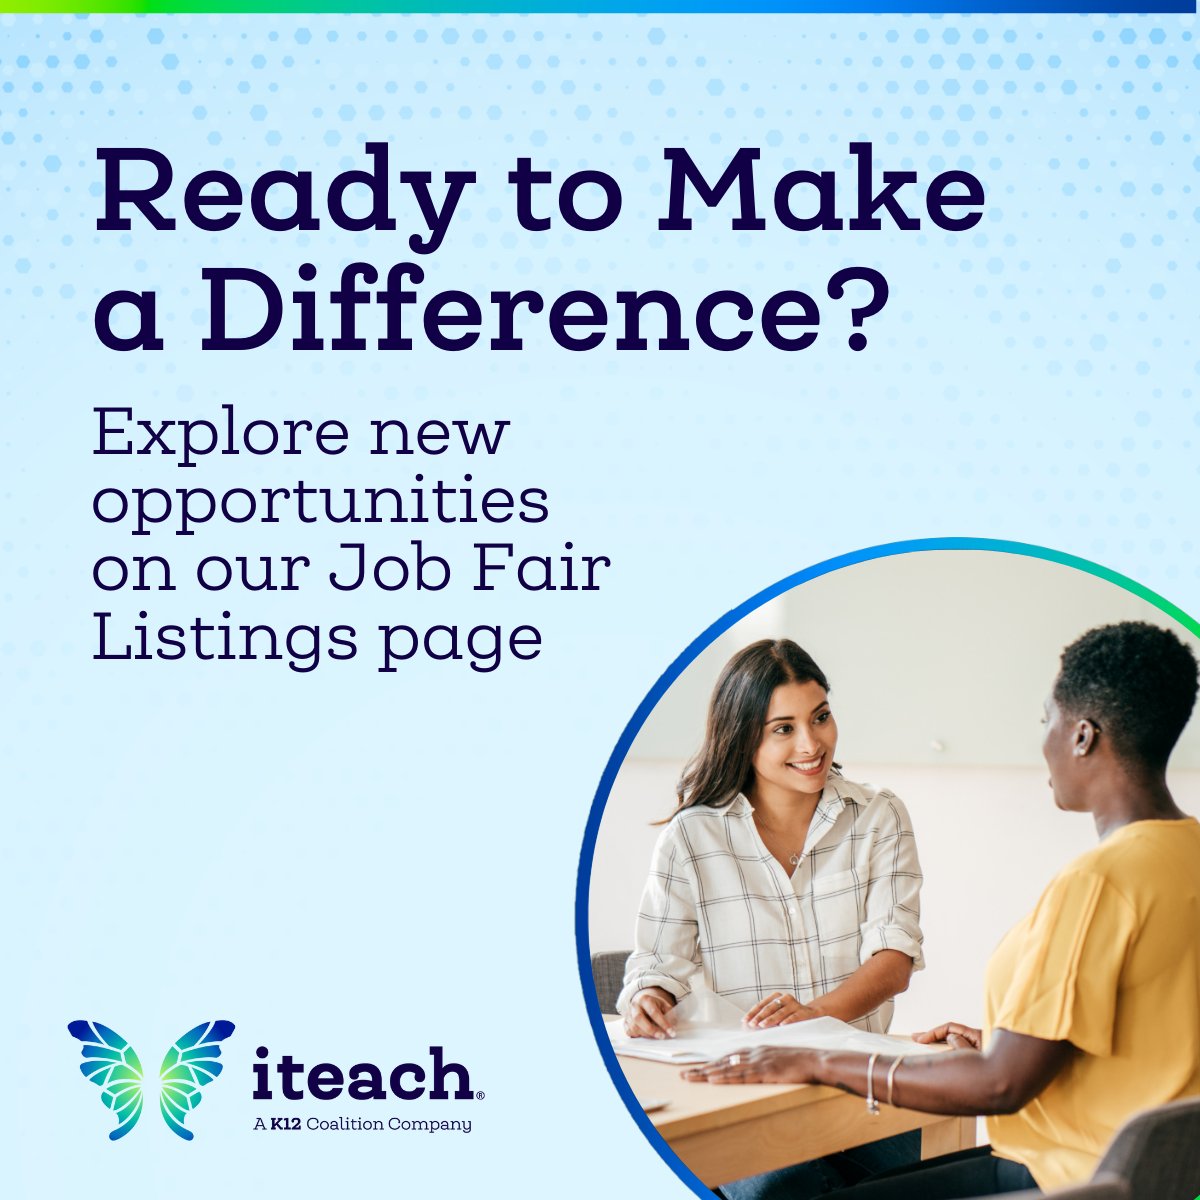 Visit our Job Fair Listings page and discover school districts near you holding job fairs this weekend! Your next opportunity is just a click away. 🍎 iteach.net/teacher-job-fa… @mesquiteisdtx @RoundRockISD @WeatherfordISD @WacoISD @coppellisd @leisd